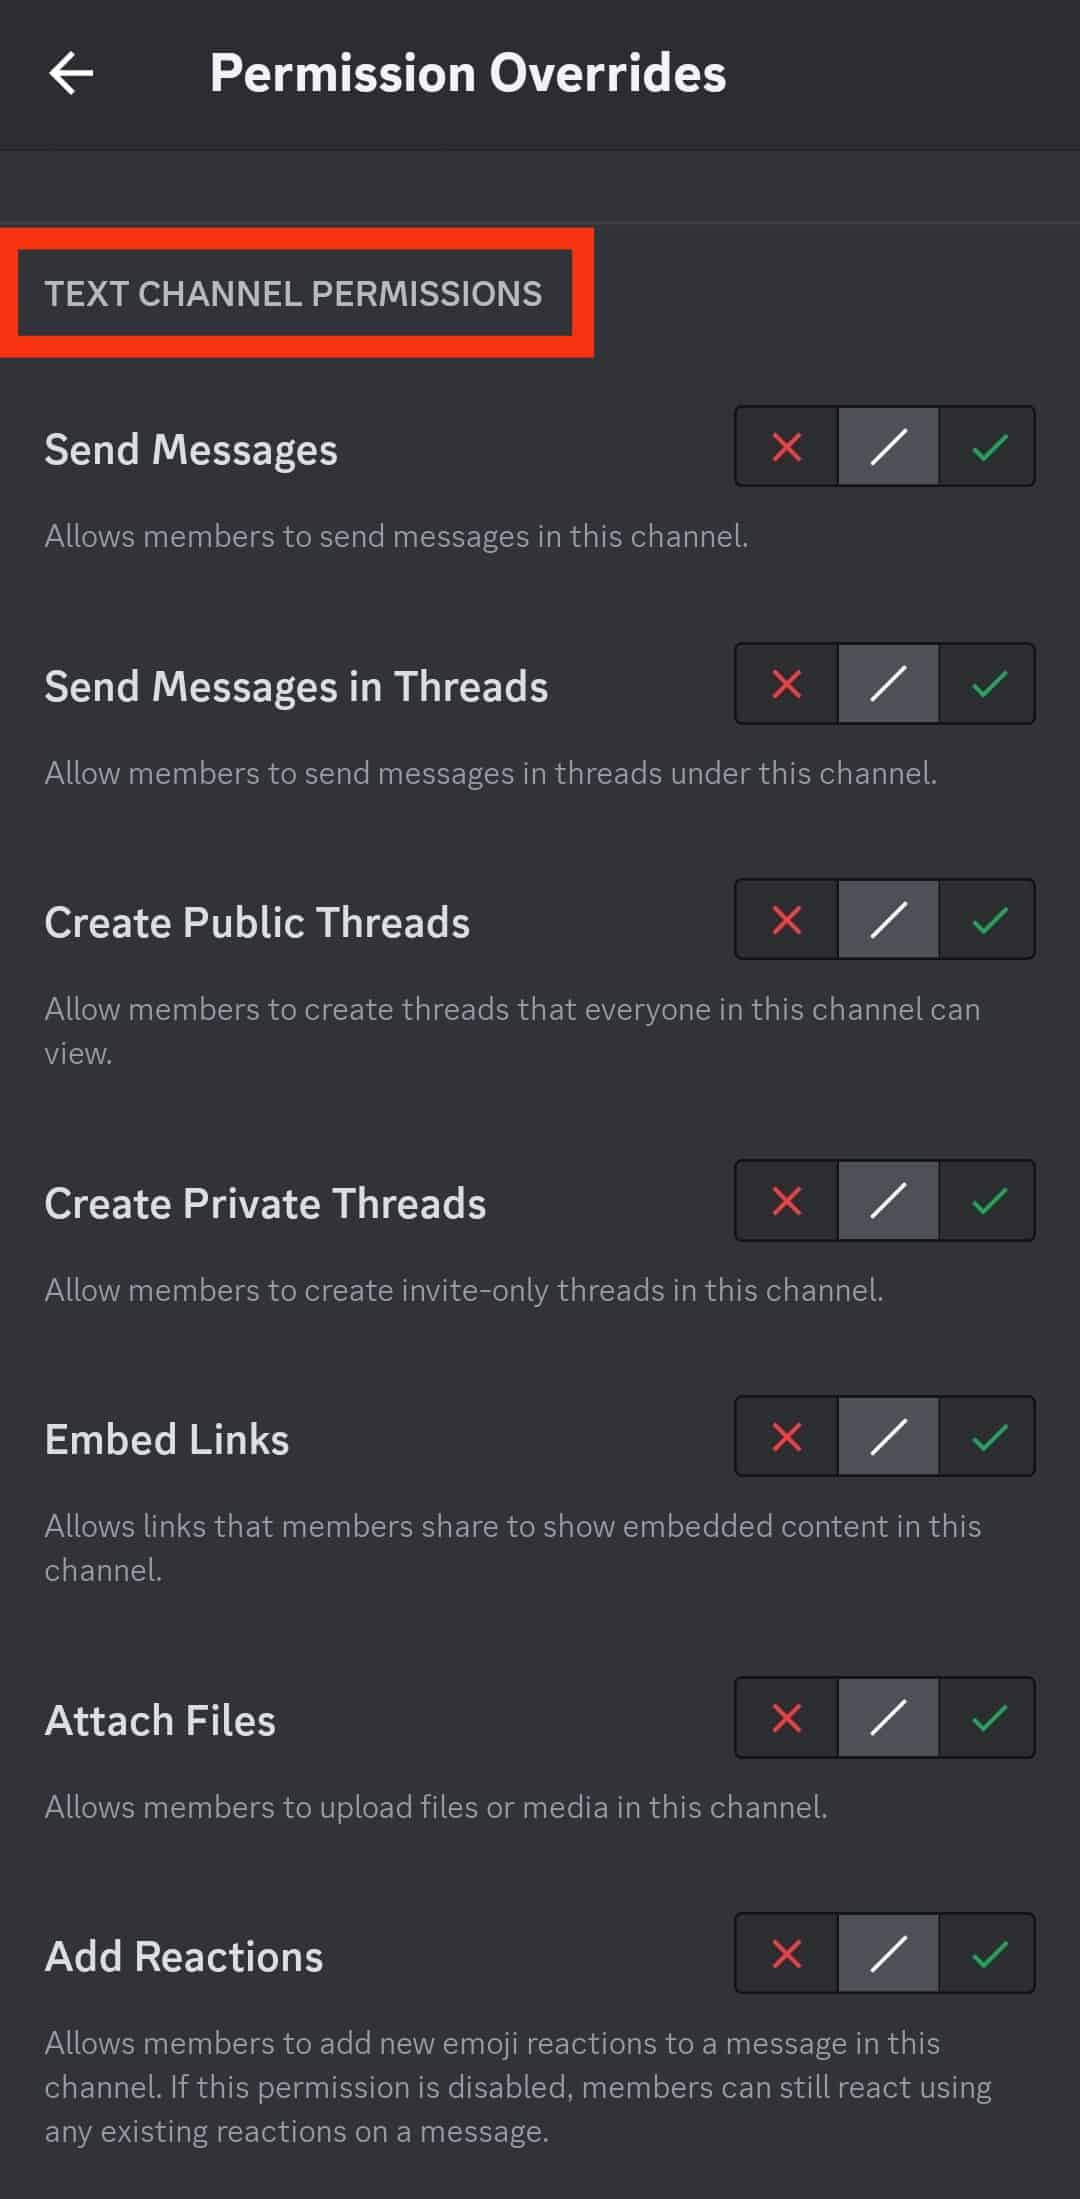 Scroll Down To The Text Channel Permissions Section